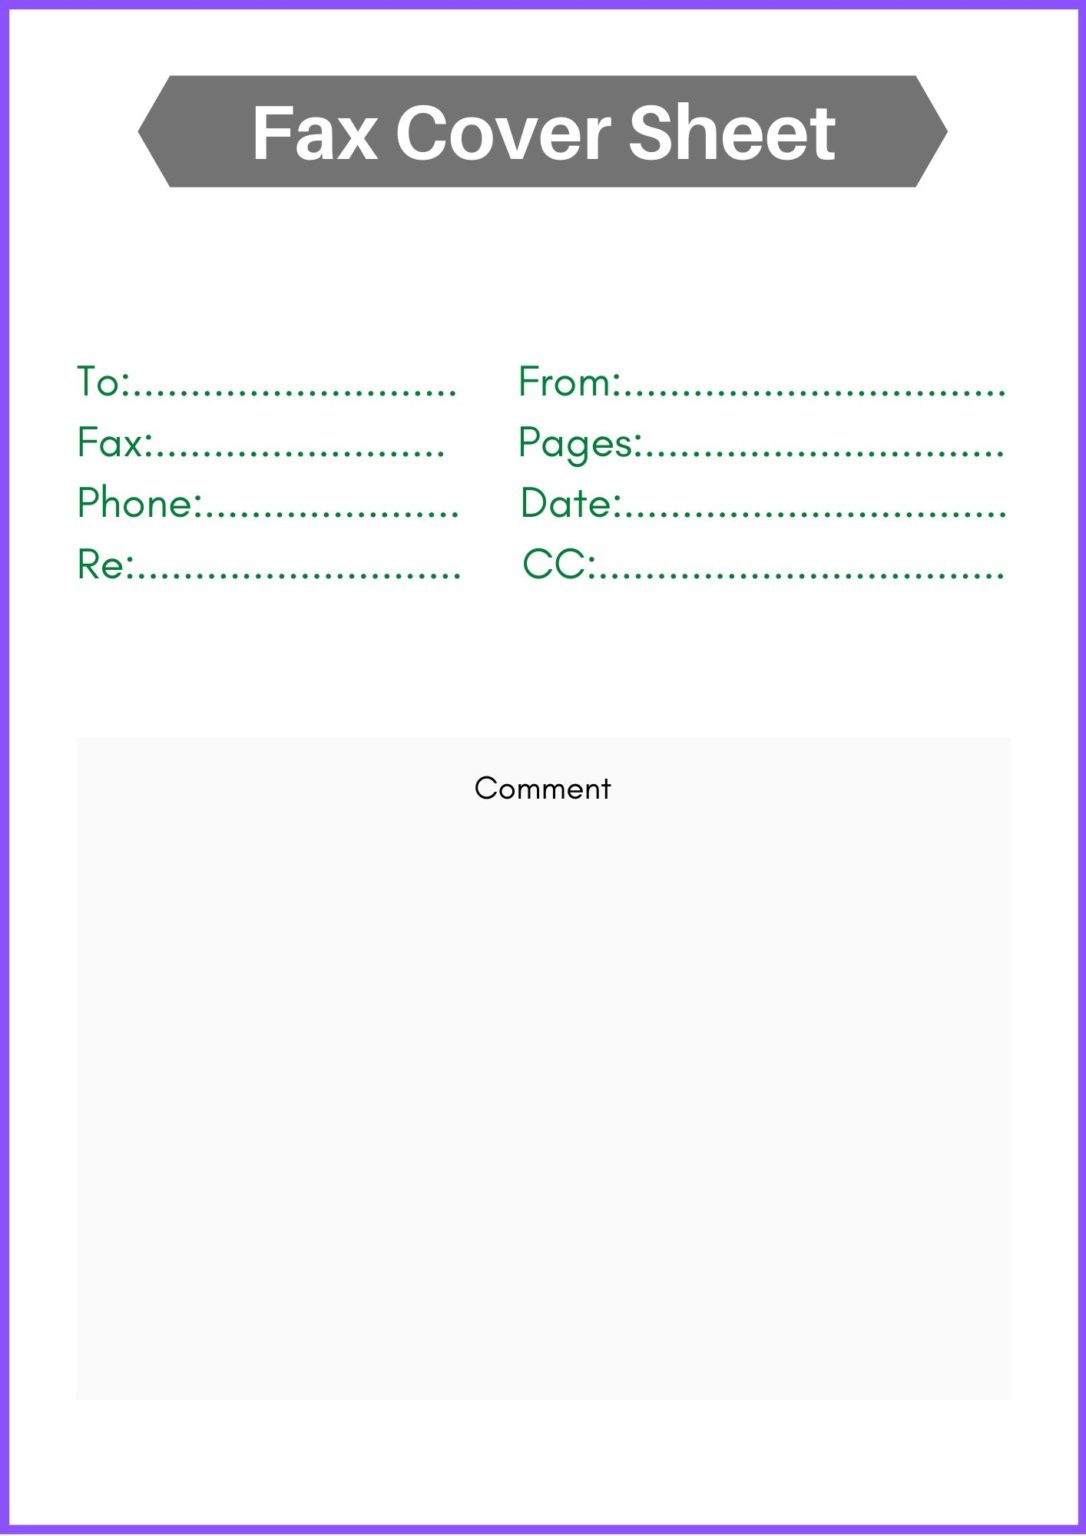 standard fax cover sheet template in pdf word